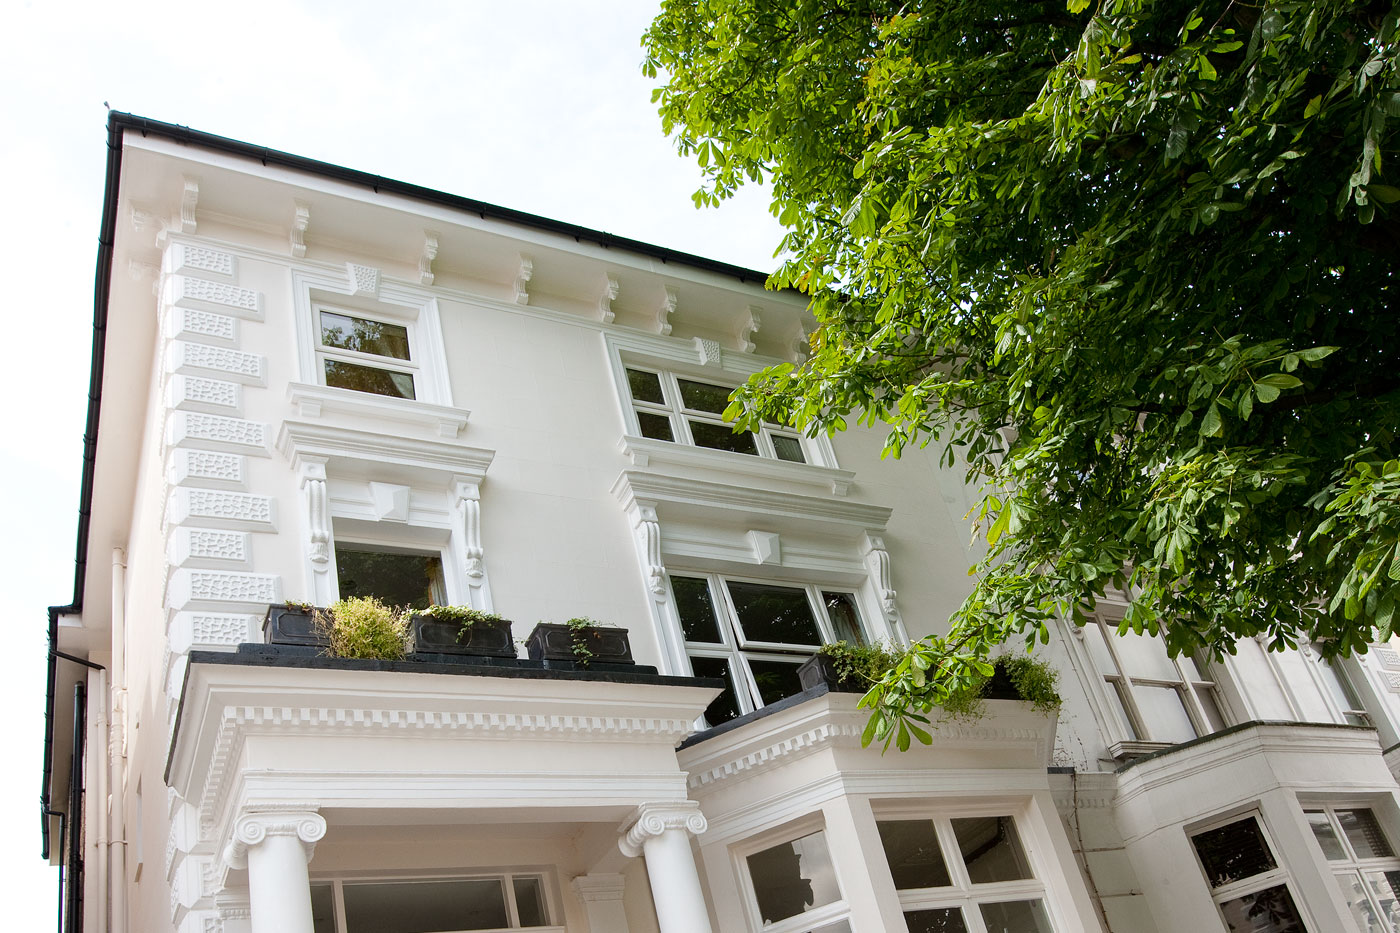 Marcus Cooper Group - 20 Belsize Square - Exterior